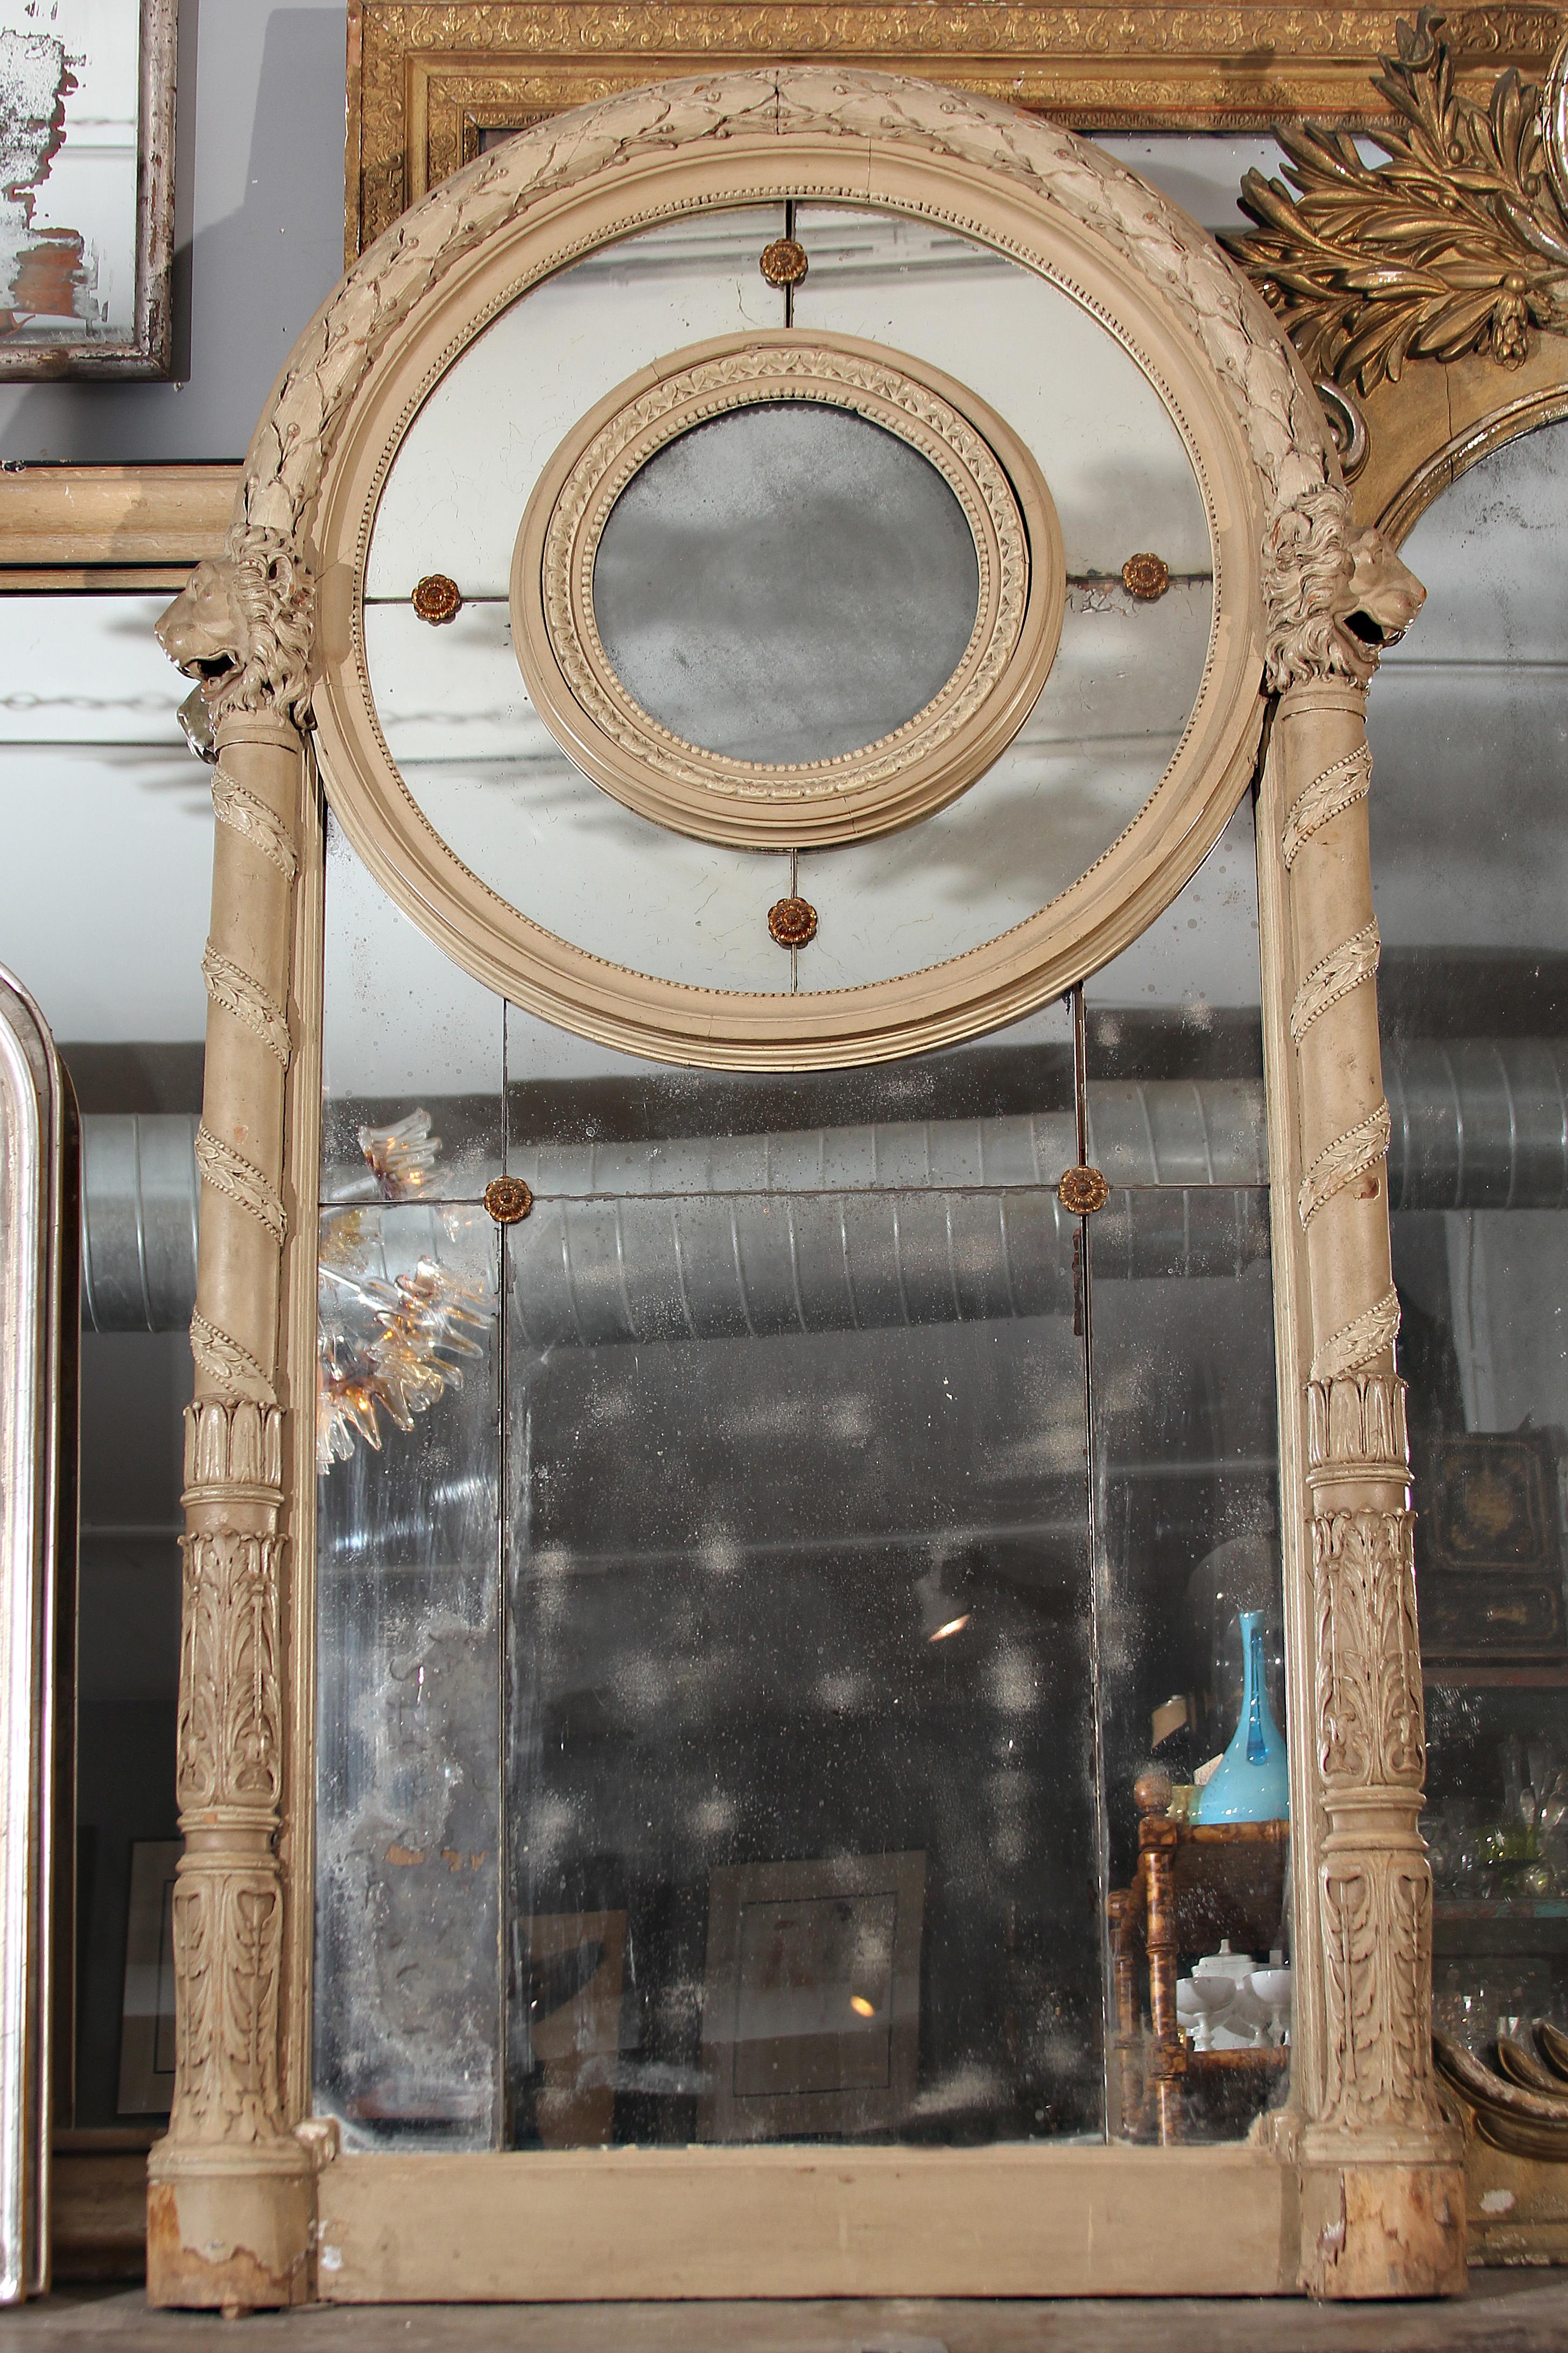 Grand 19th century Italian mirror in original paint with hand carved lions looking outward on each side. Beautiful patina to each mirrored panel.